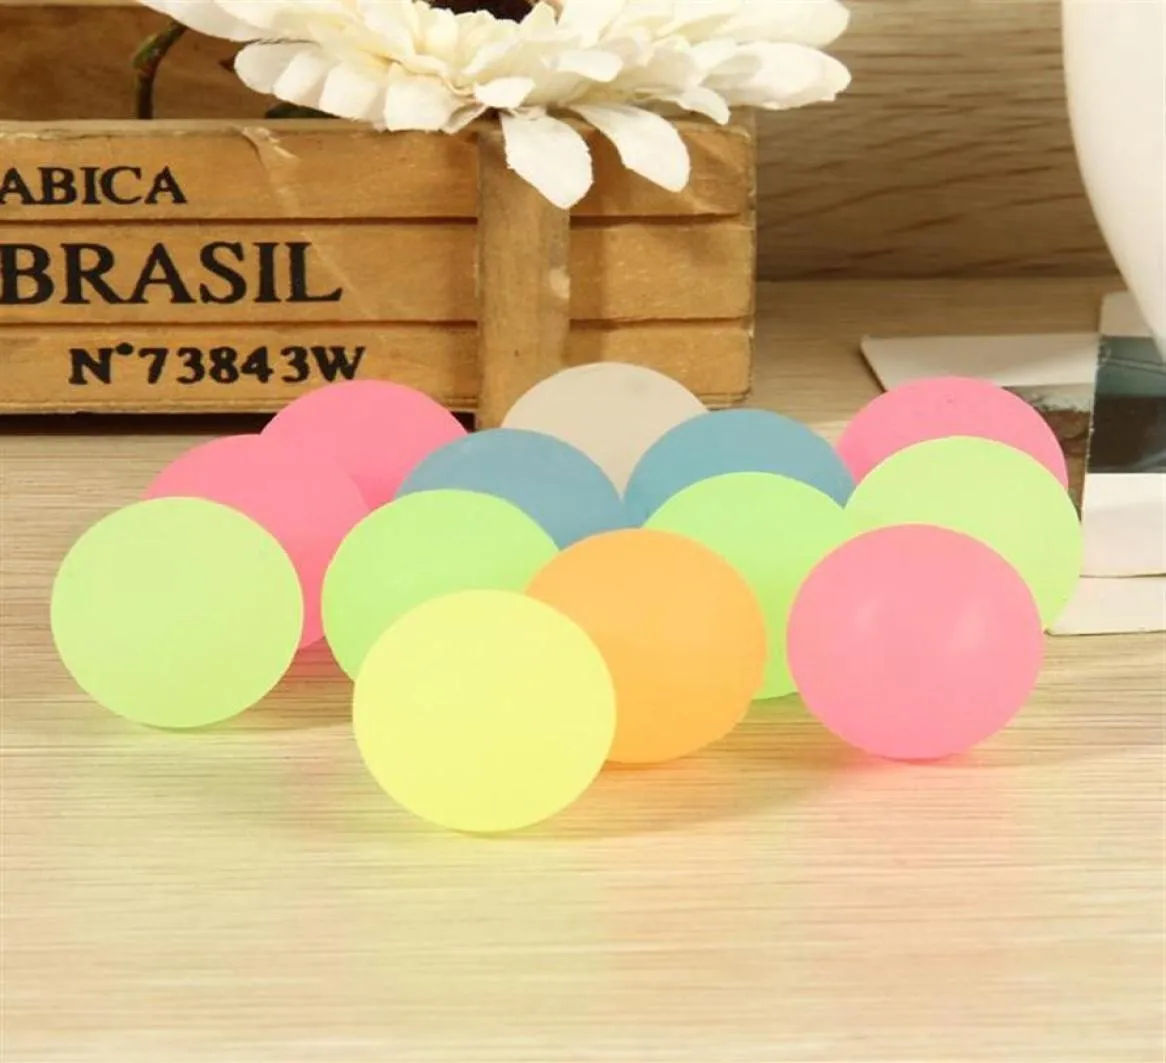 100 st High Bounce Rubber Ball Luminous Small Bouncy Ball Pinata Fillers Kids Toy Party Favor Bag Glow In the Dark254a8342854